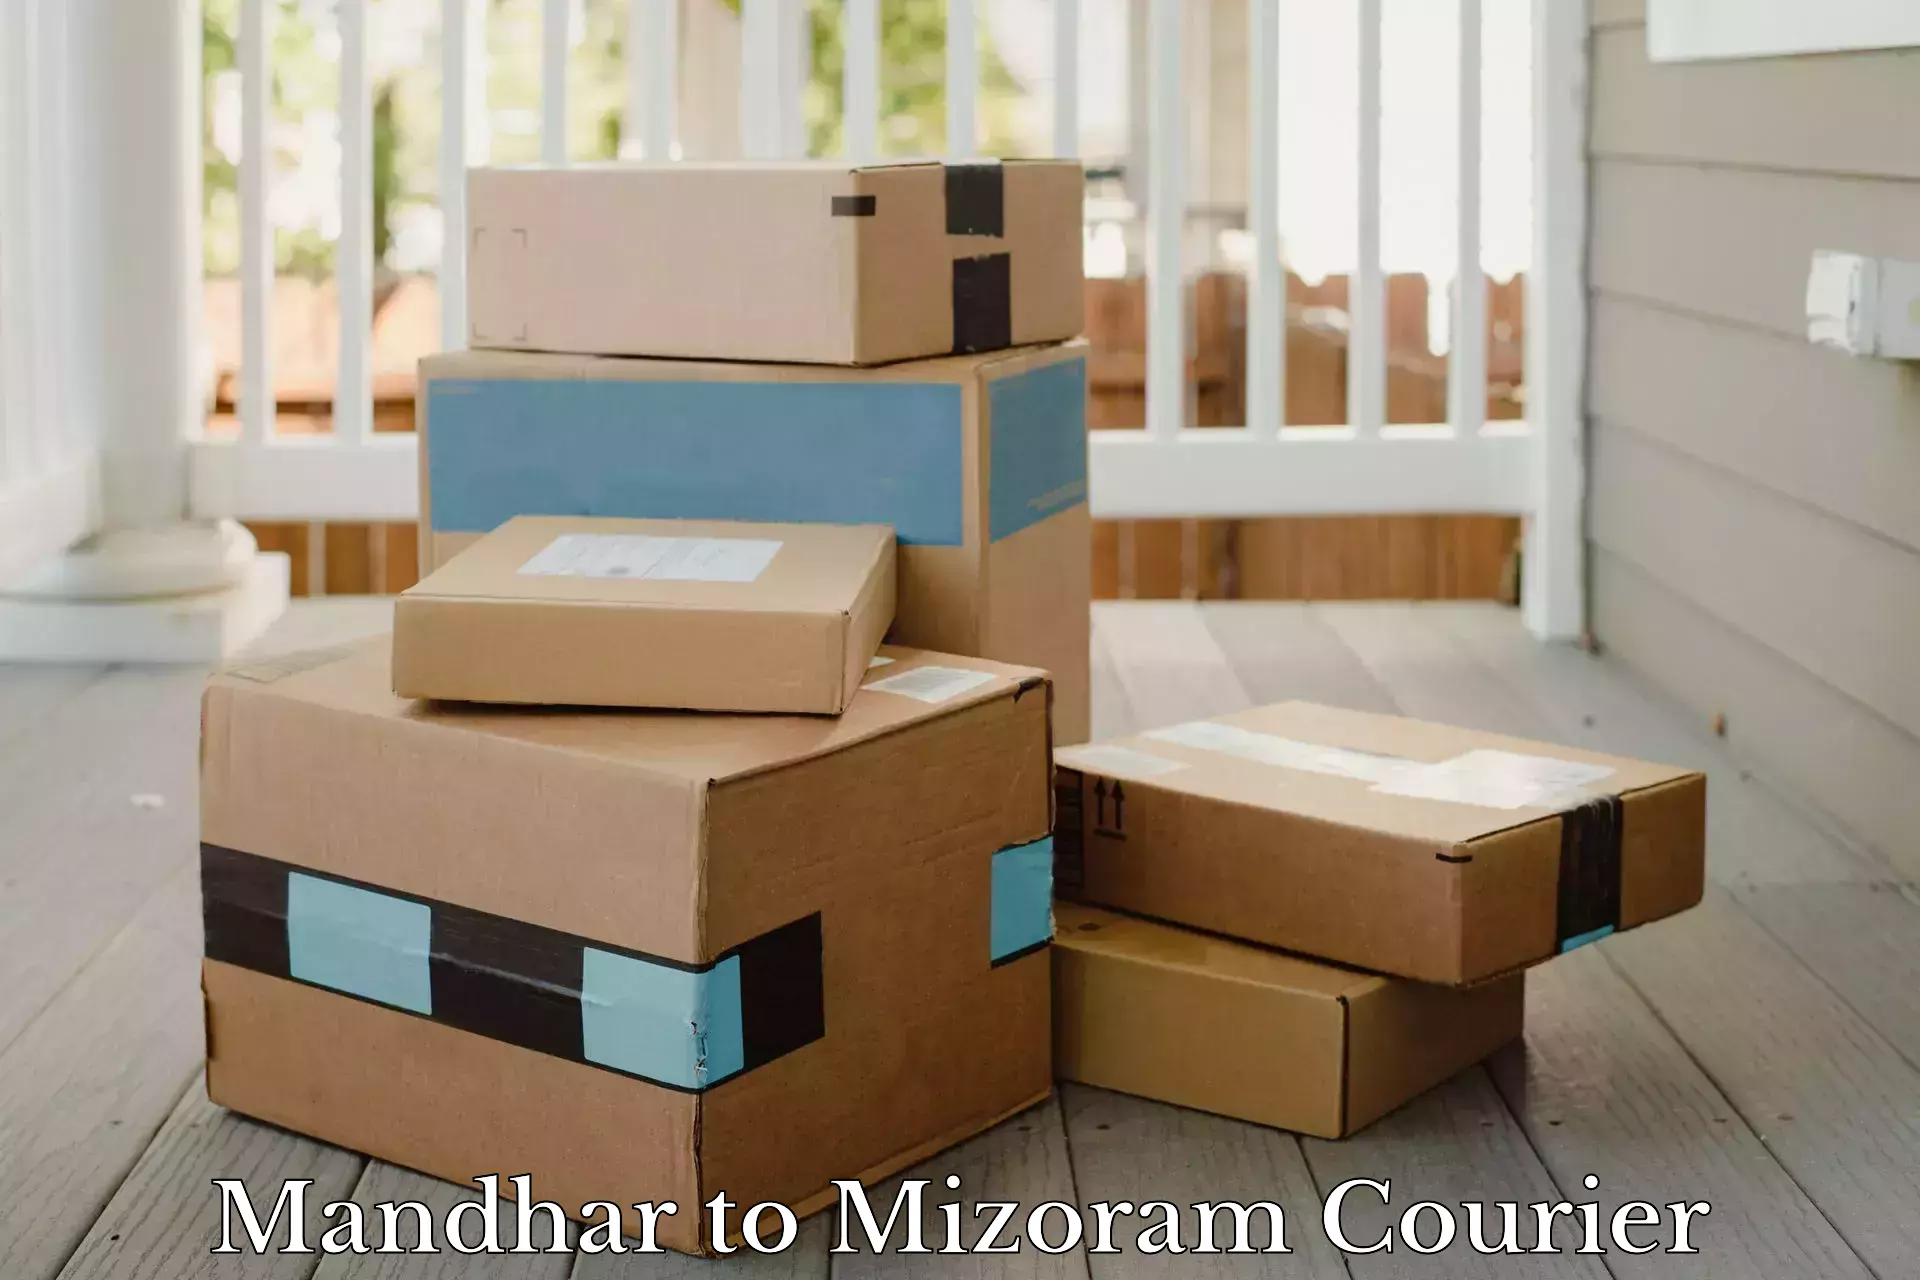 Same-day delivery options Mandhar to Mizoram